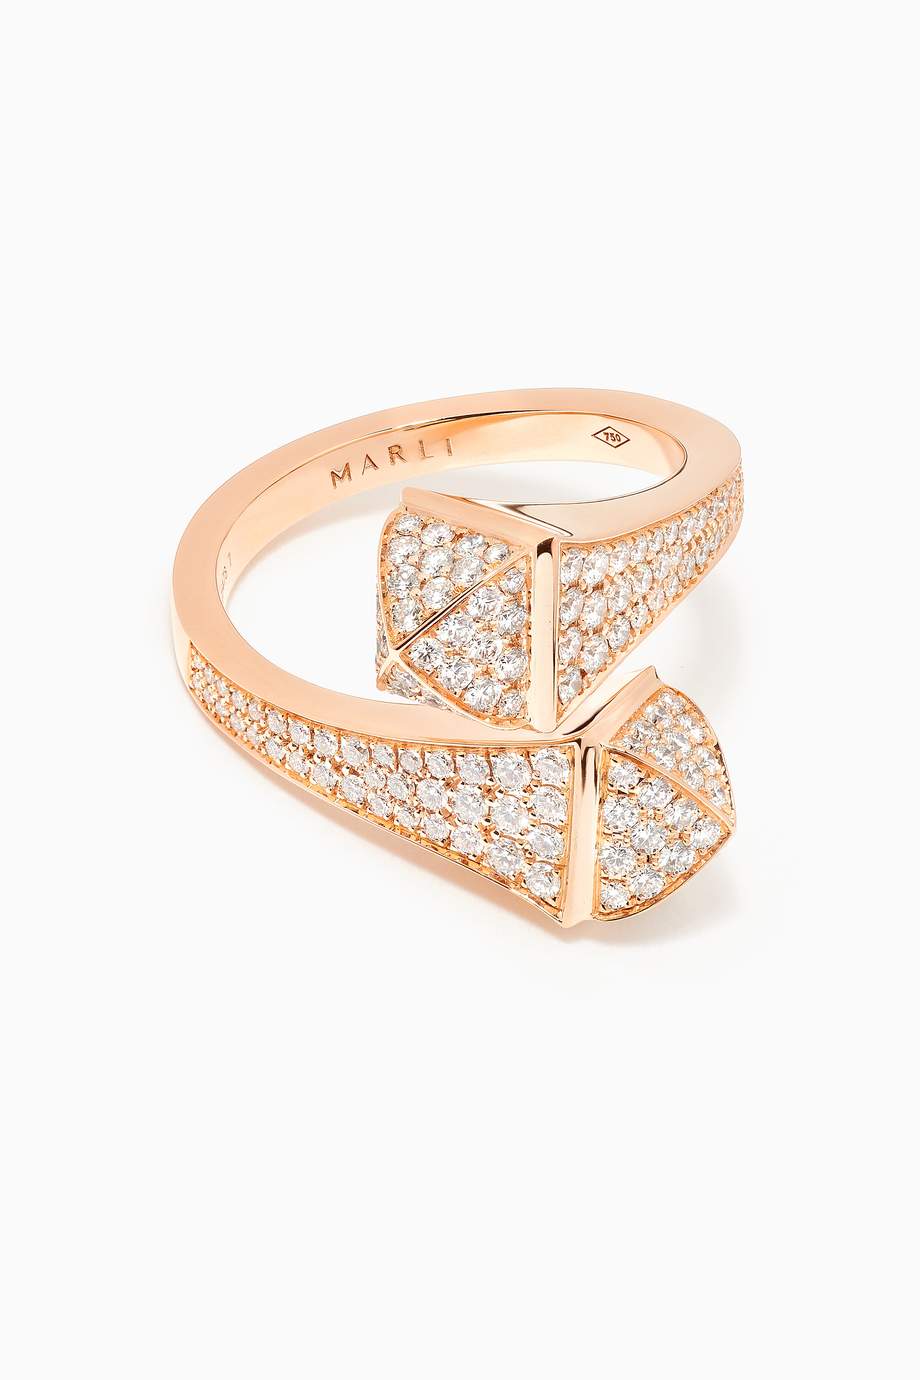 Shop Marli Rose Gold Cleo Diamond Statement Ring in 18kt Rose Gold for ...